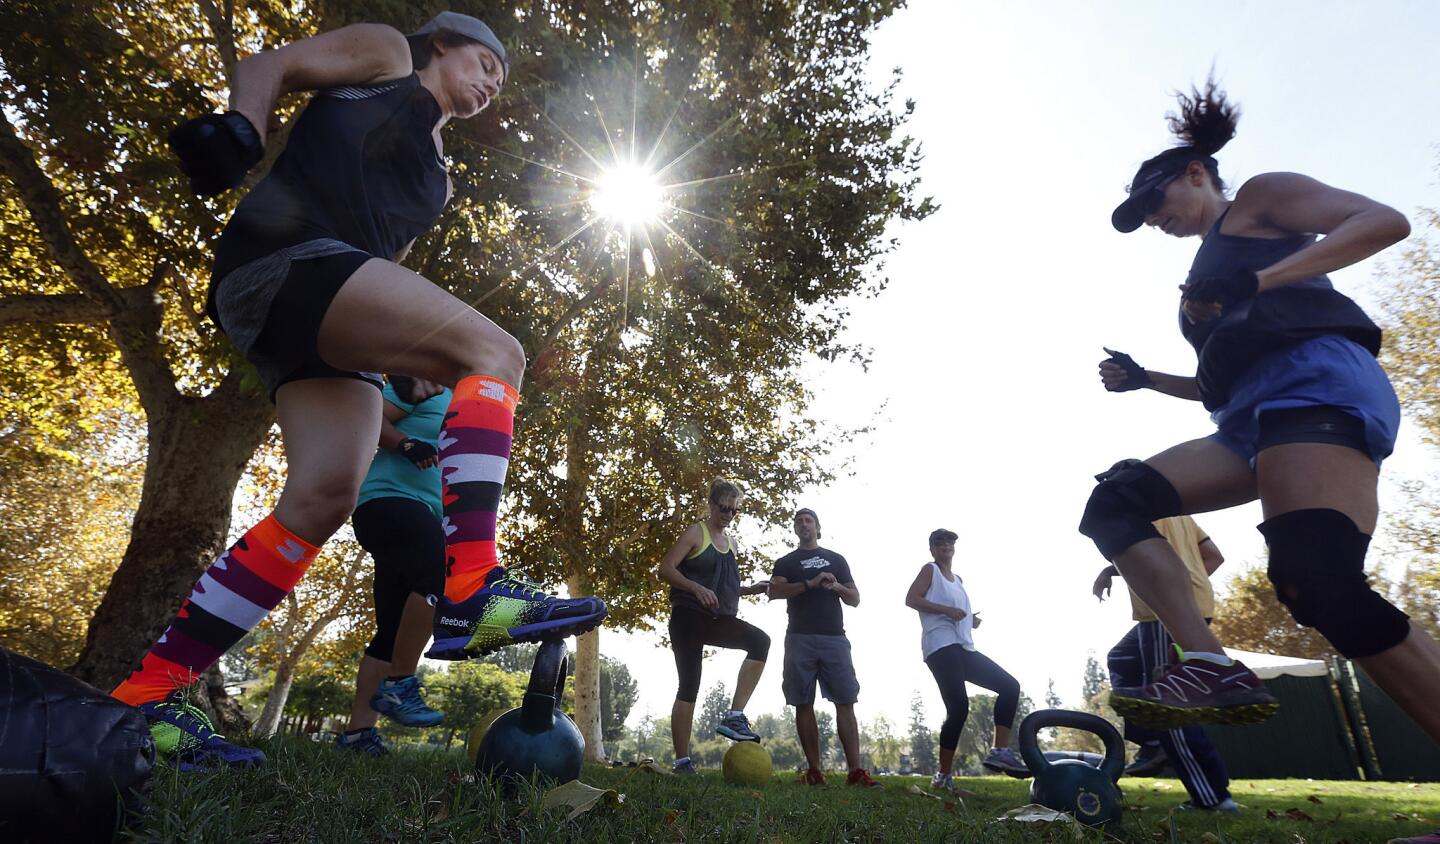 On a warm Monday, Tracy Riepl, left, and Diana Kratt do a leg and cardio exercise with others in a class called Gut Check Fitness Los Angeles at Warner Park in Woodland Hills.